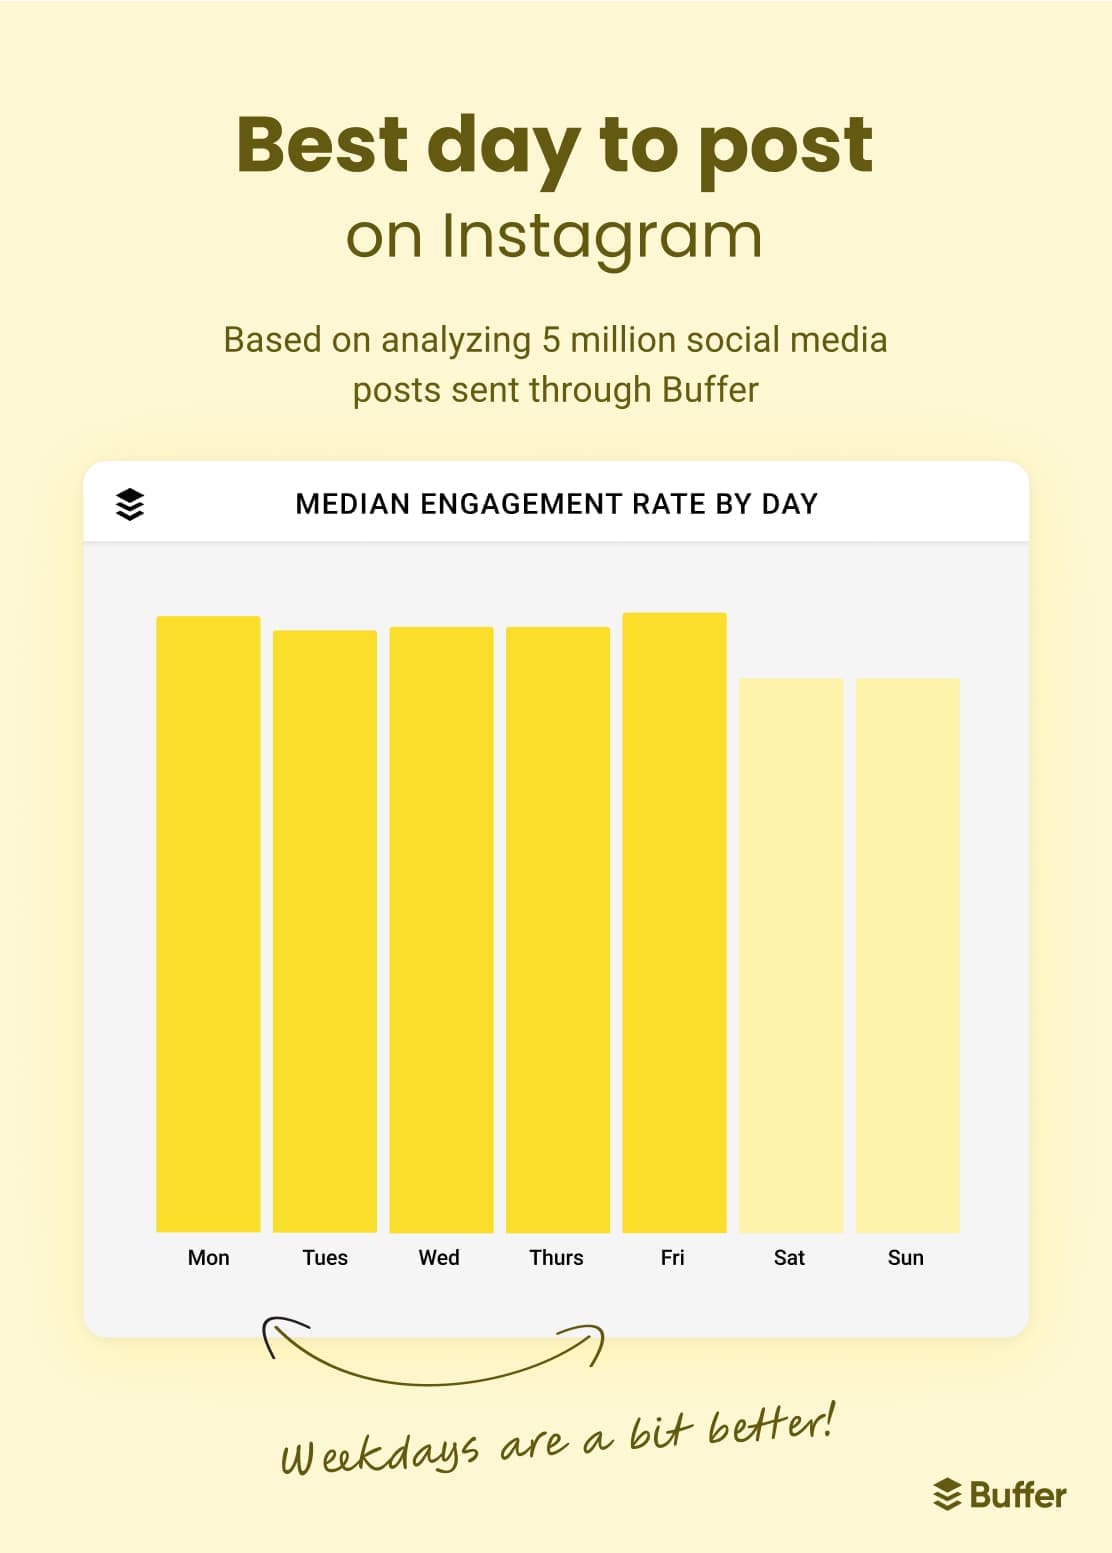 Bar chart of the best day to post on Instagram based on analyzing 1 million social media posts sent through Buffer displaying weekdays as the best days to post.